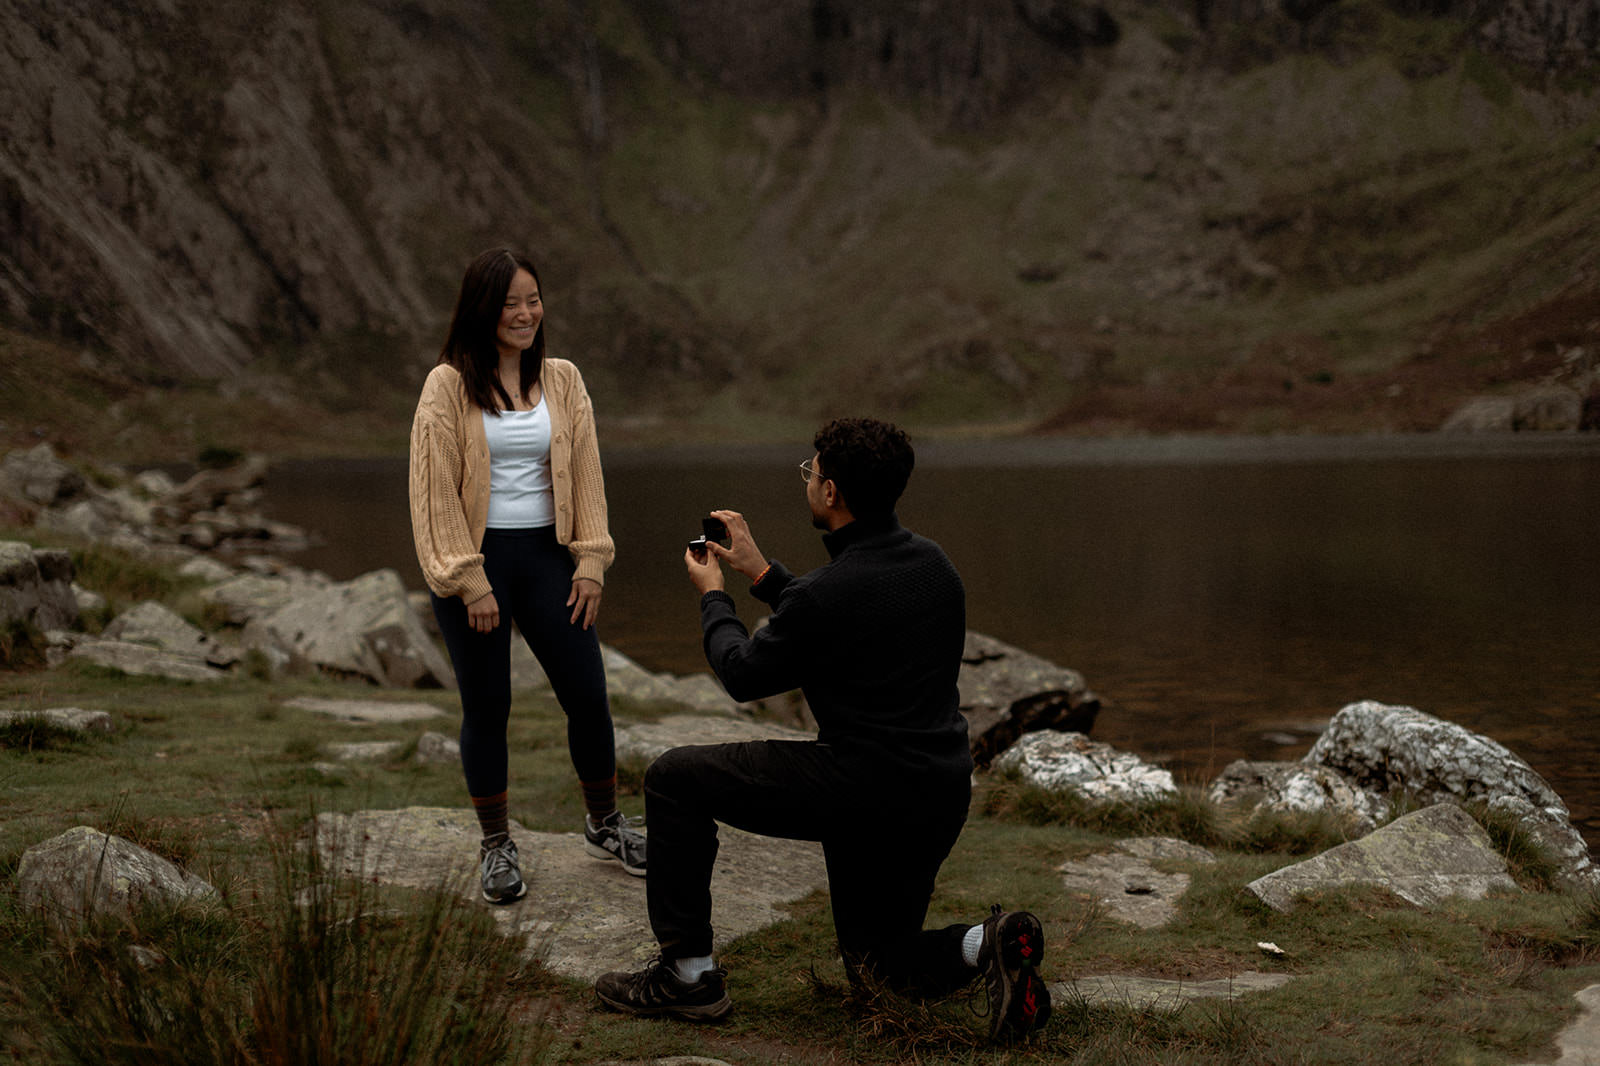 Secret proposal planning and photography in Eryri (Snowdonia)